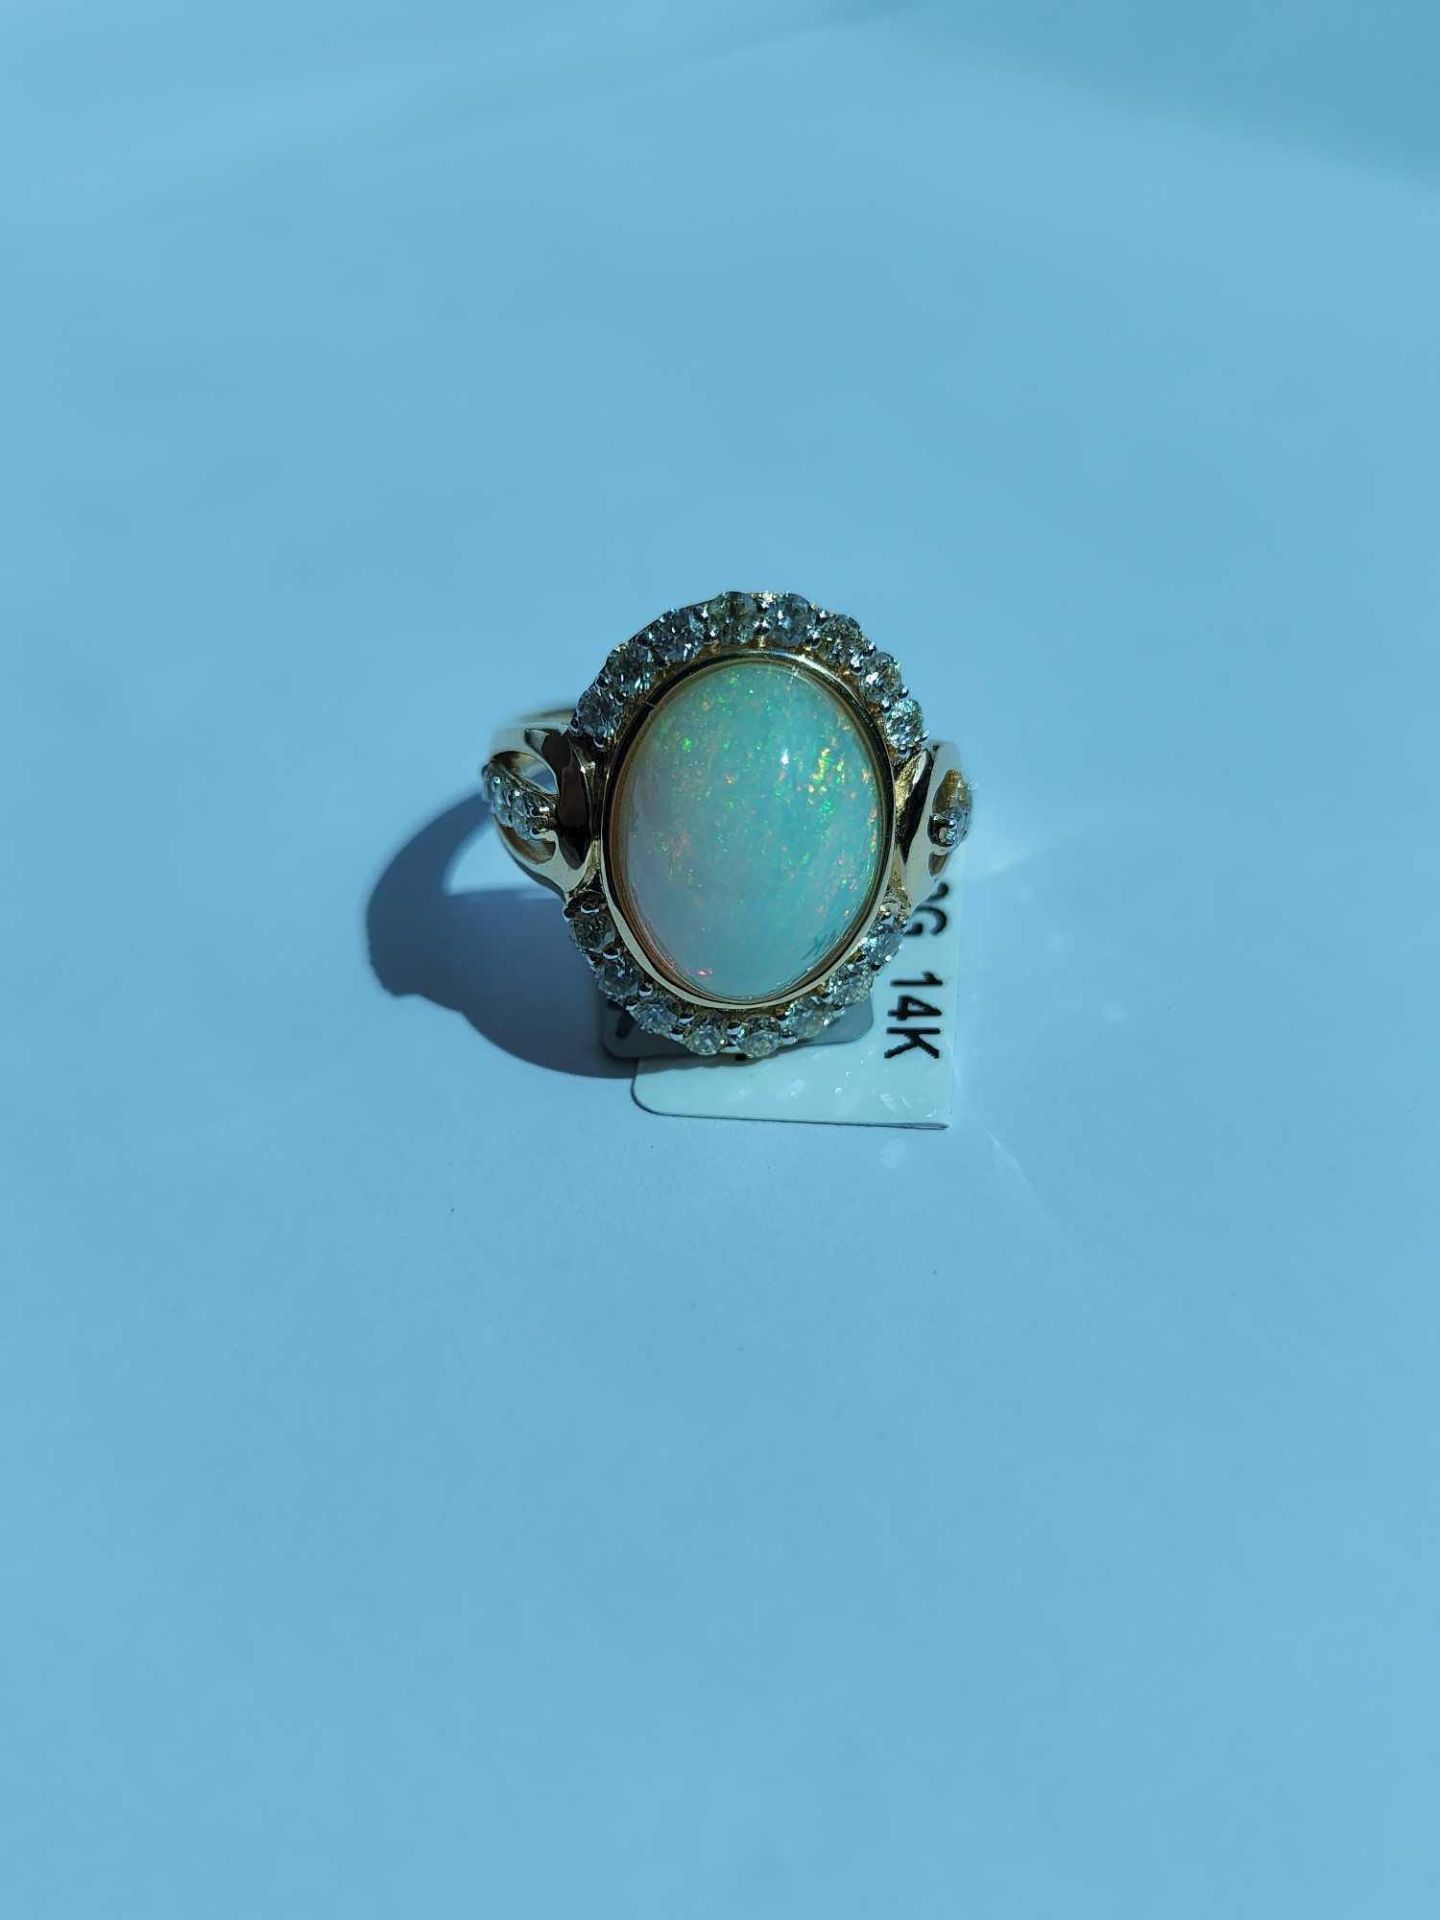 14K Yellow Gold Lady's Custome Made Diamond & Opal Ring 5.80 GR TW - Image 2 of 7